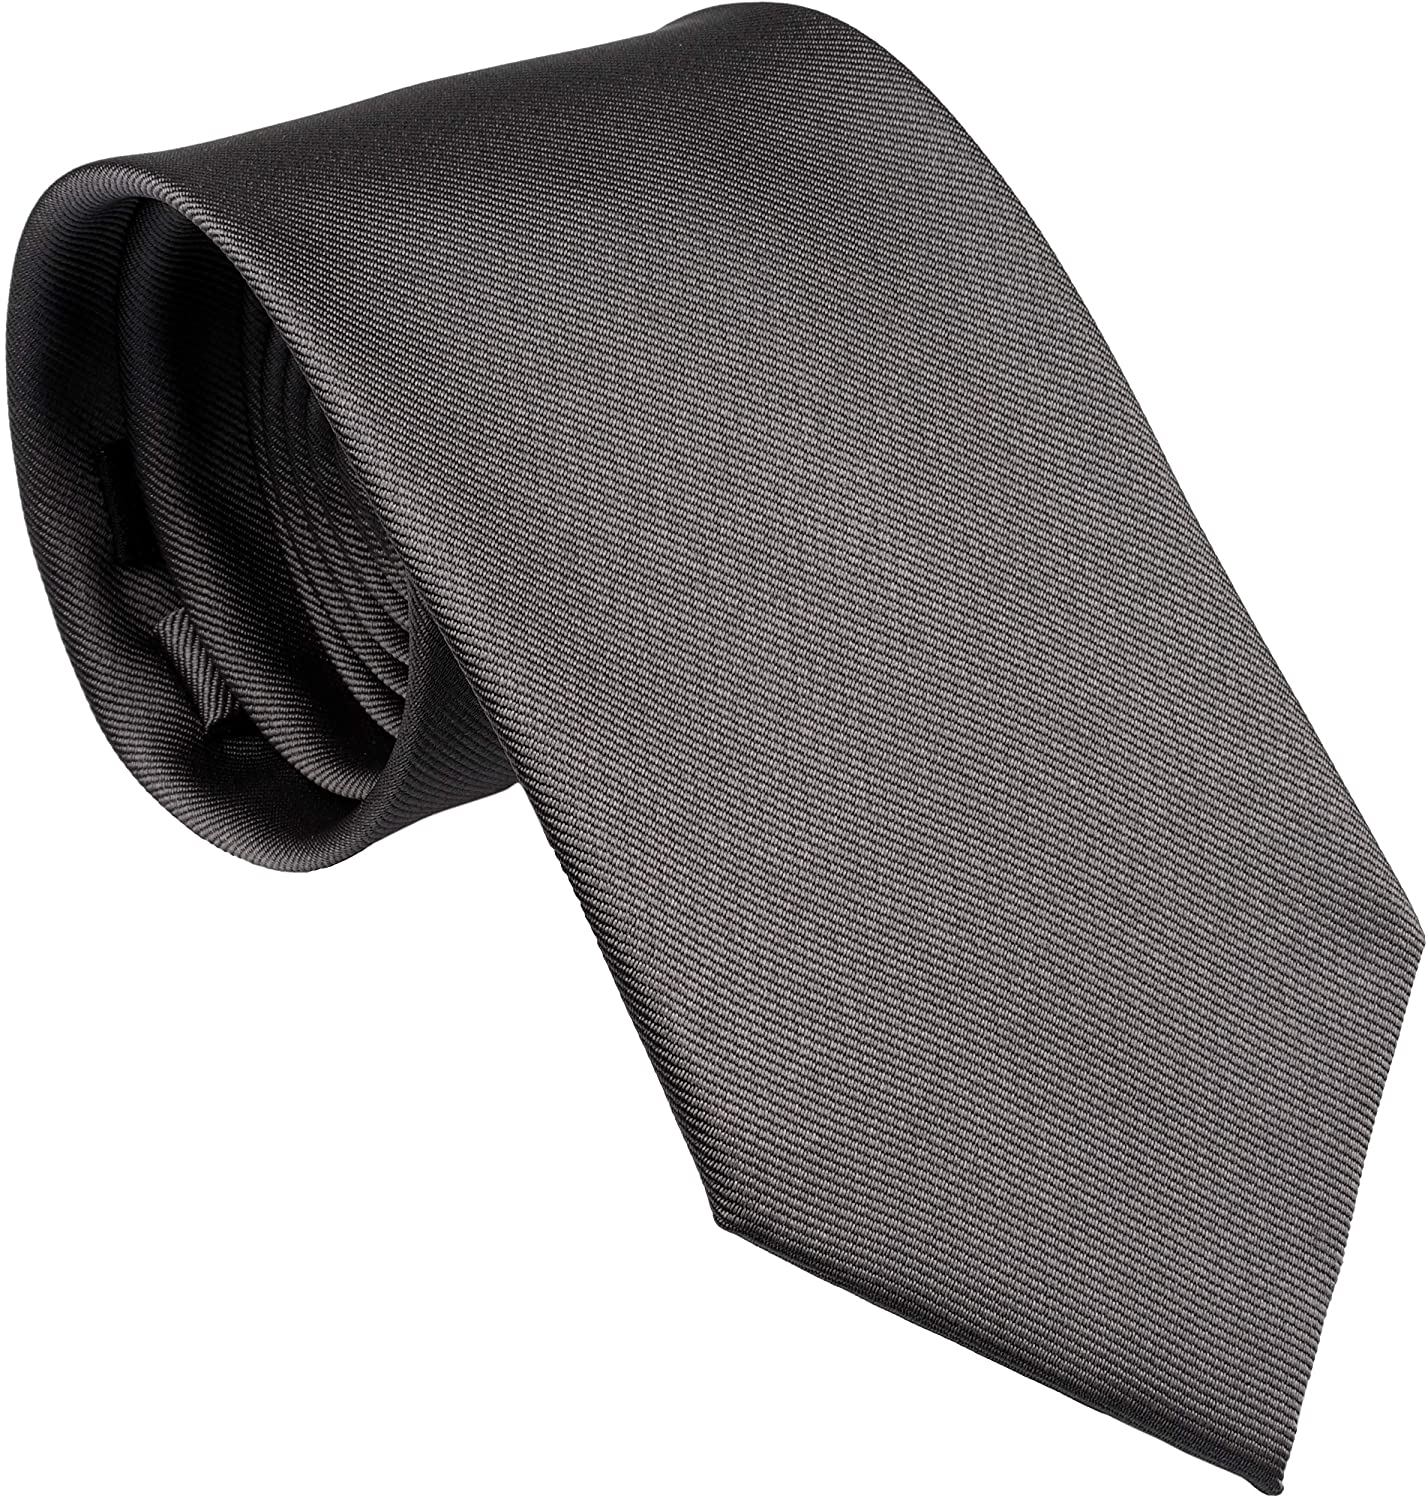 ZENXUS Extra Long Solid Tie for Men Big and Tall, 63 or 70 inch XL 